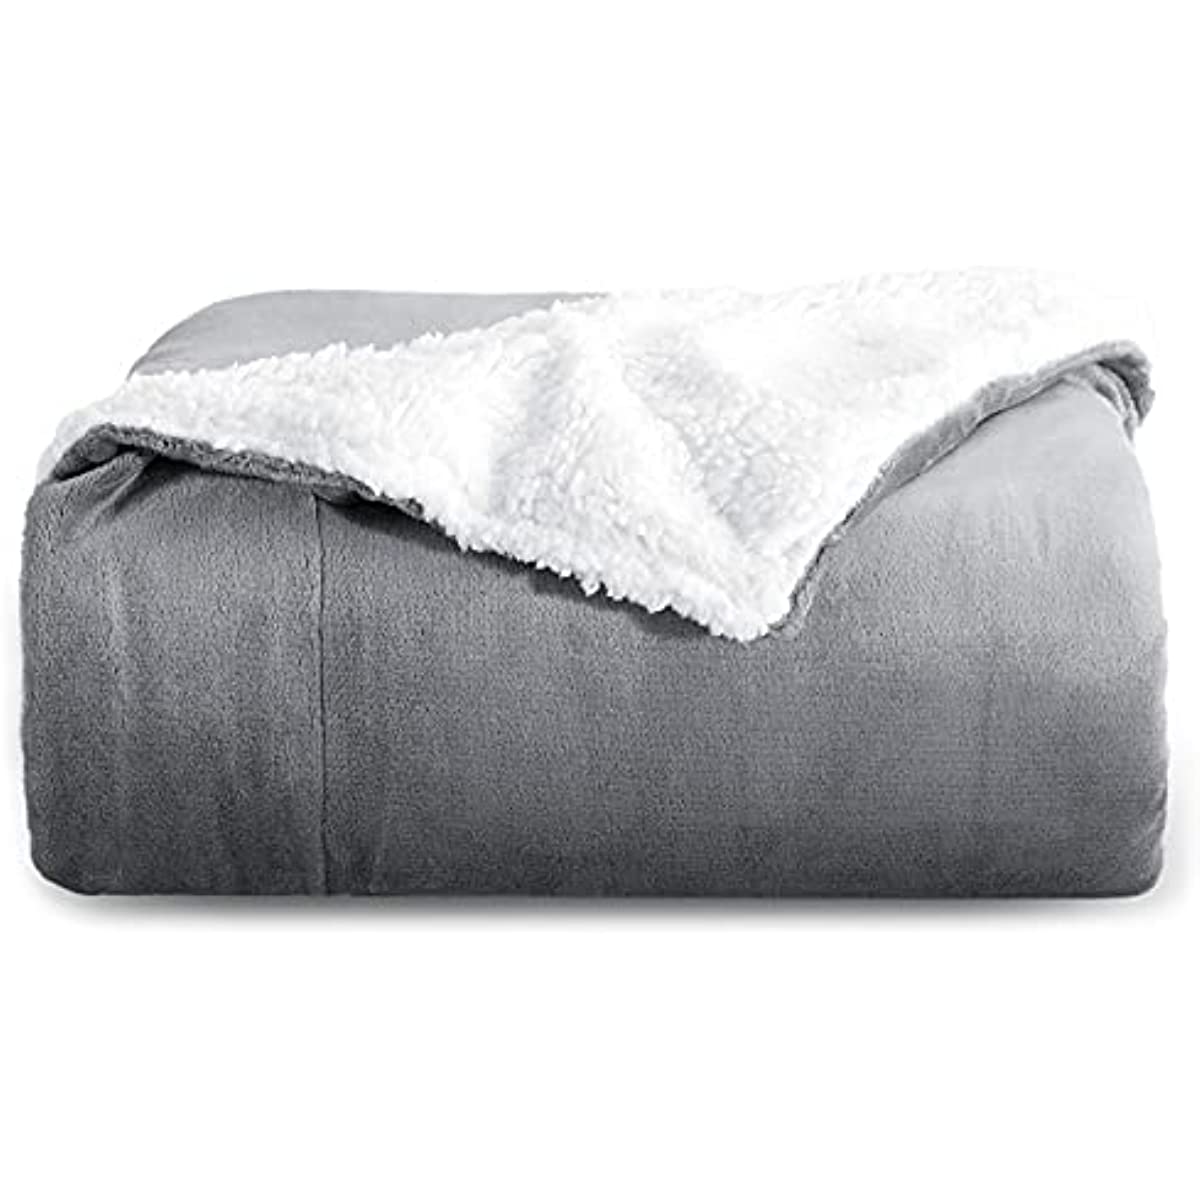 Sherpa Fleece Throw Blanket for Couch - Grey Thick Fuzzy Warm Soft Blankets and Throws for Sofa. 50x60 Inches